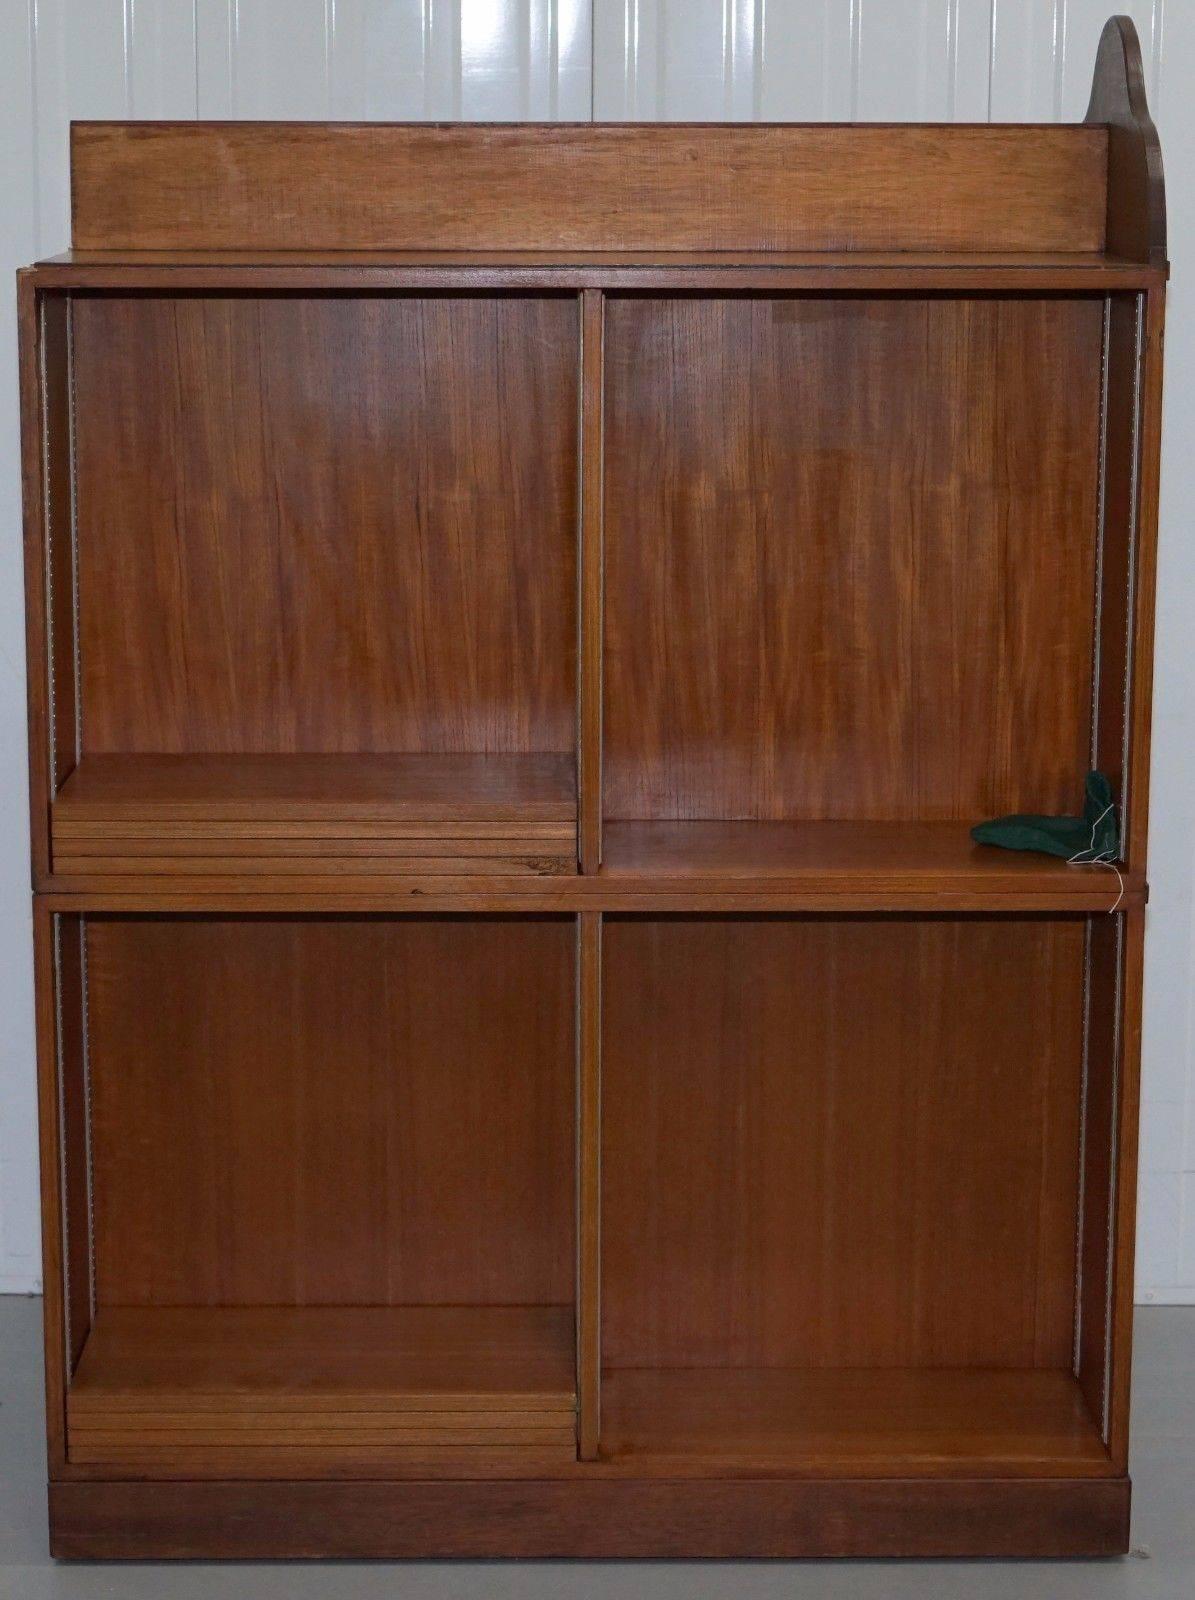 Hand-Carved Matching Pair of Mahogany Double Sided Bookcases on Wheels Great Room Dividers